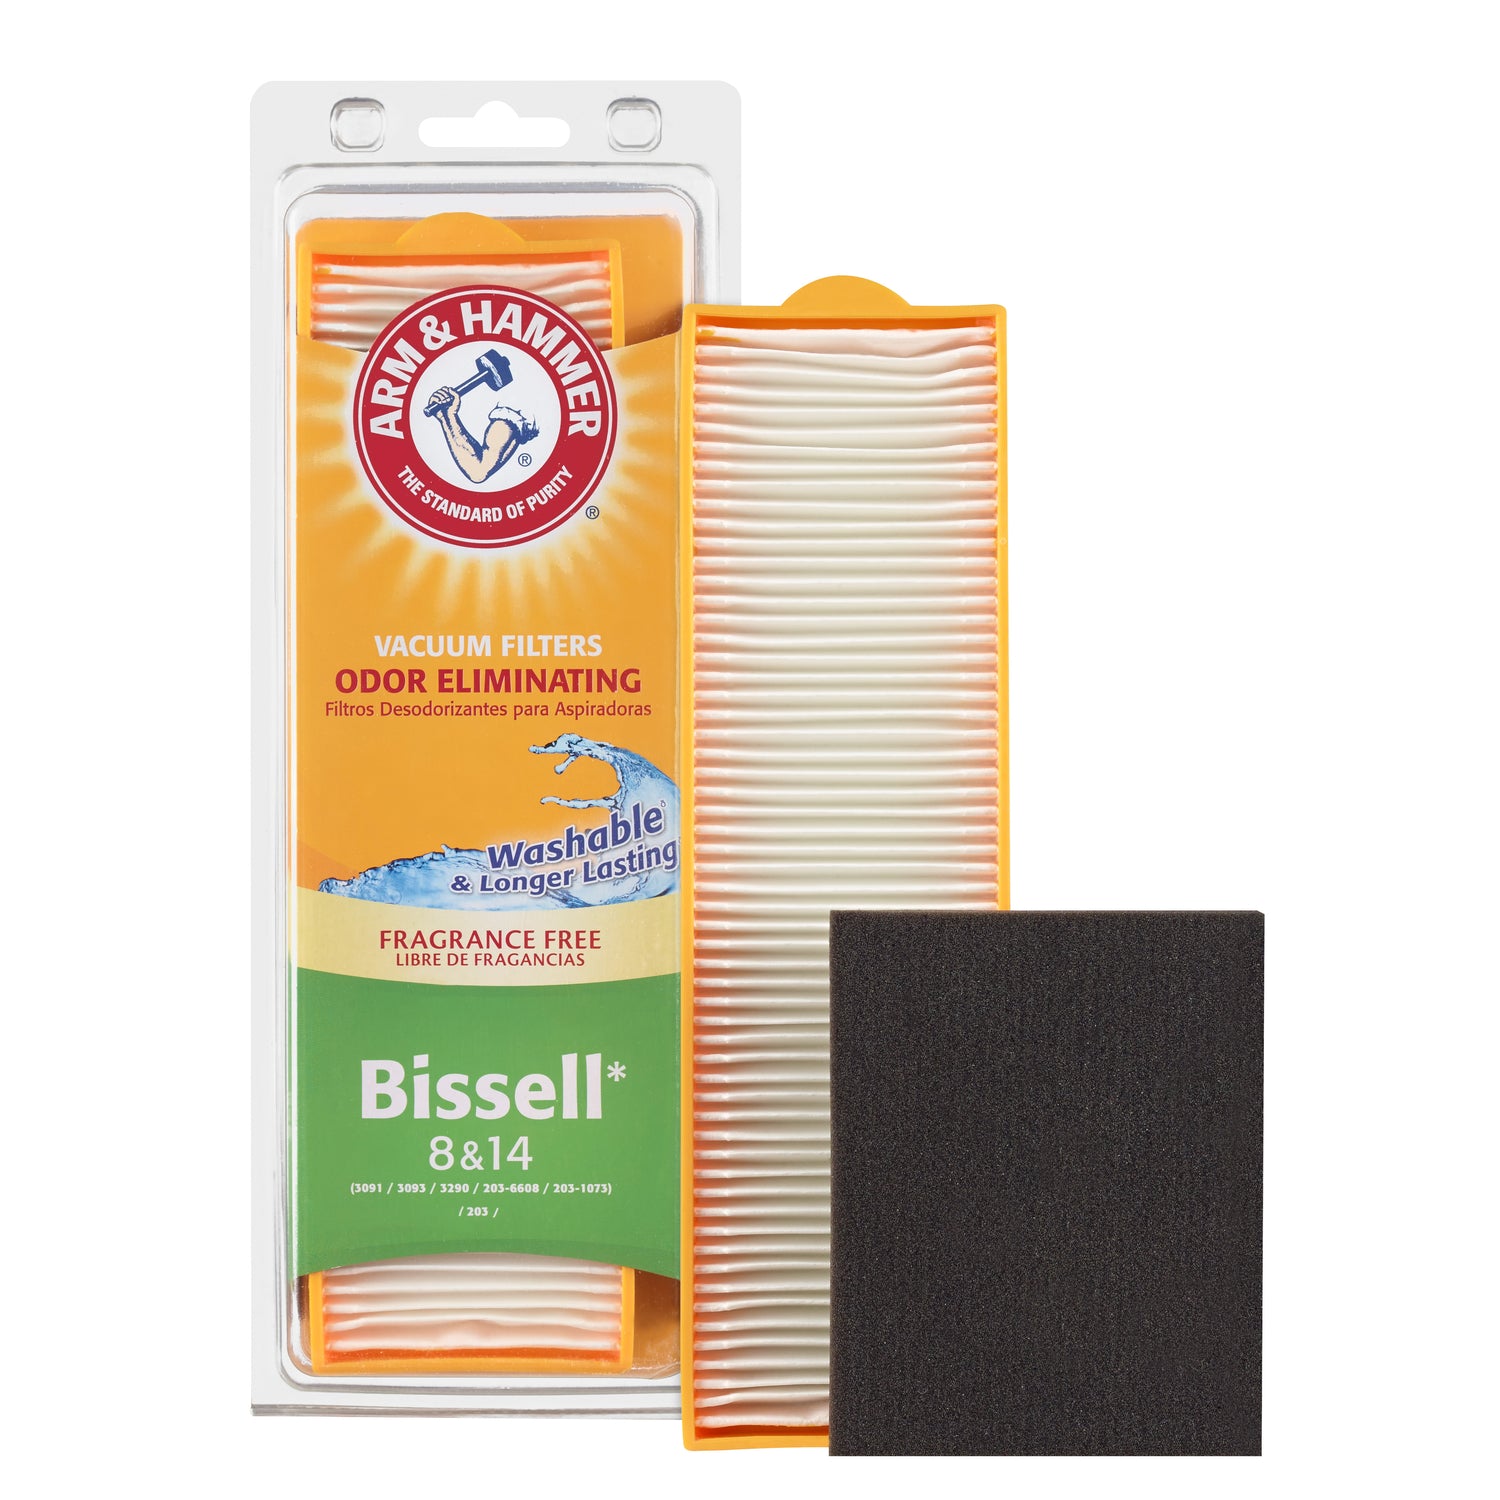 ELECTROLUX HOME PRODUCTS INC, Arm & Hammer Bissell Vacuum Filter 1 pk